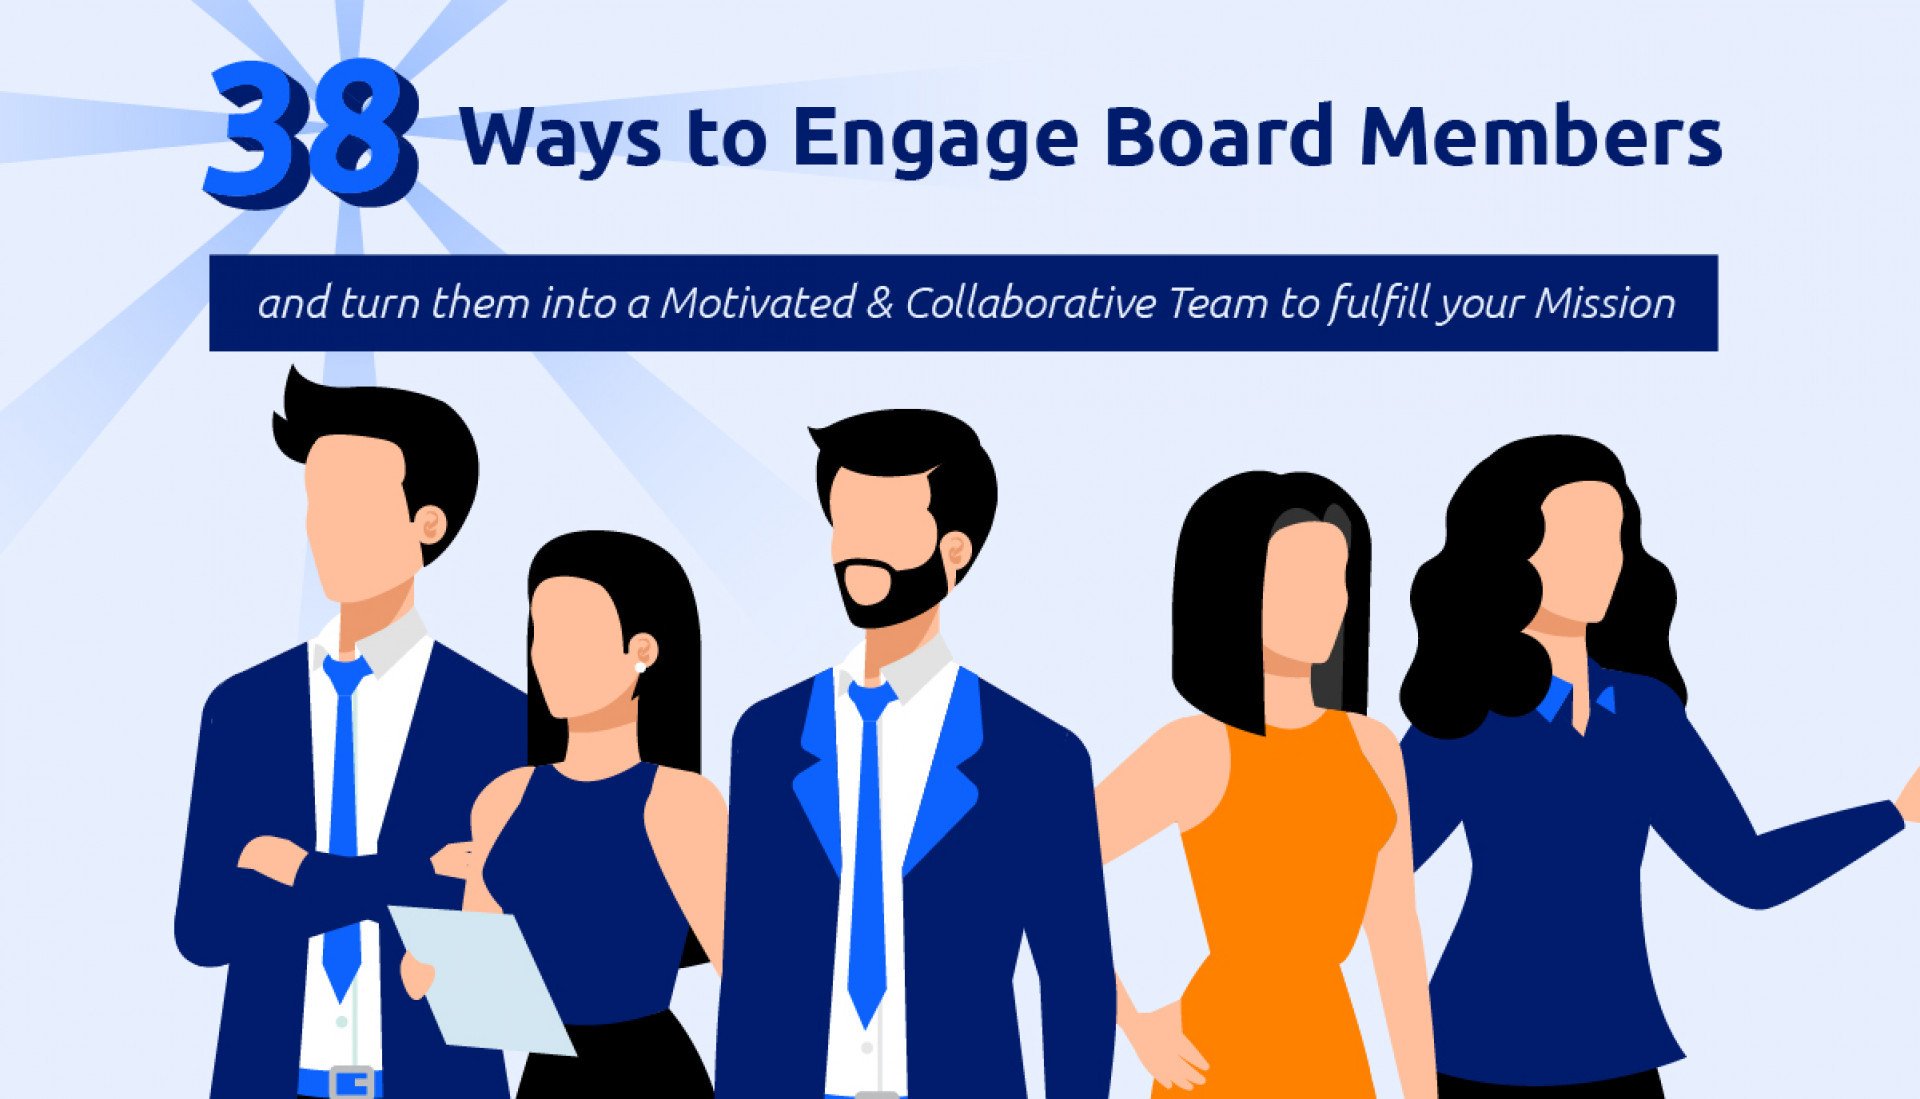 38 Ways to Engage Board Members and Turn them into a Motivated & Collaborative Team to Fulfill Your Mission